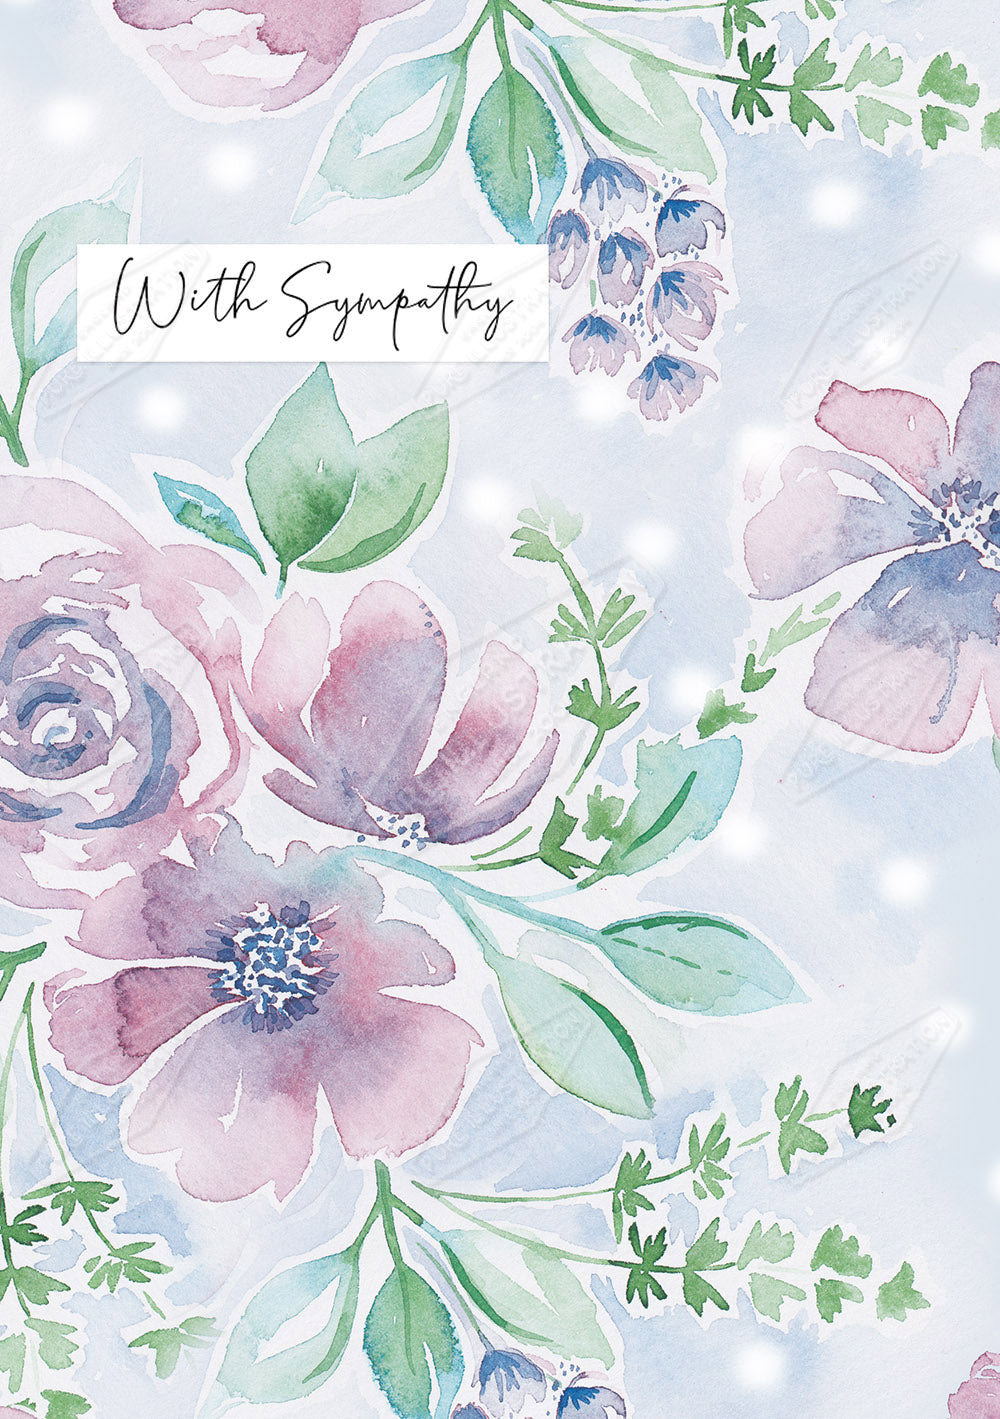 00033498KSP- Kerry Spurling is represented by Pure Art Licensing Agency - Sympathy Greeting Card Design